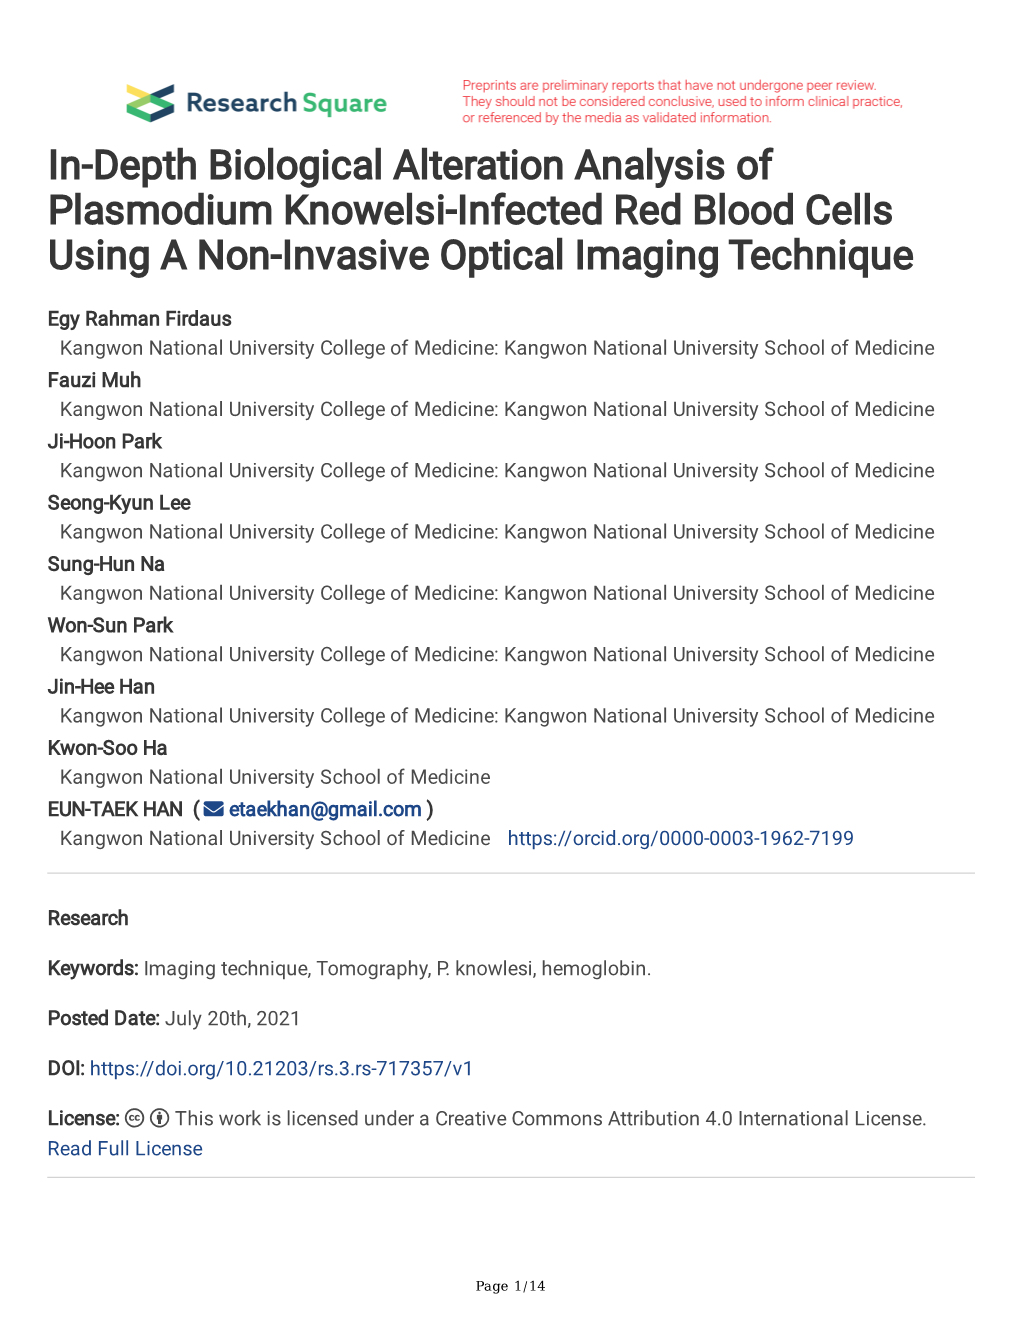 In-Depth Biological Alteration Analysis of Plasmodium Knowelsi-Infected Red Blood Cells Using a Non-Invasive Optical Imaging Technique